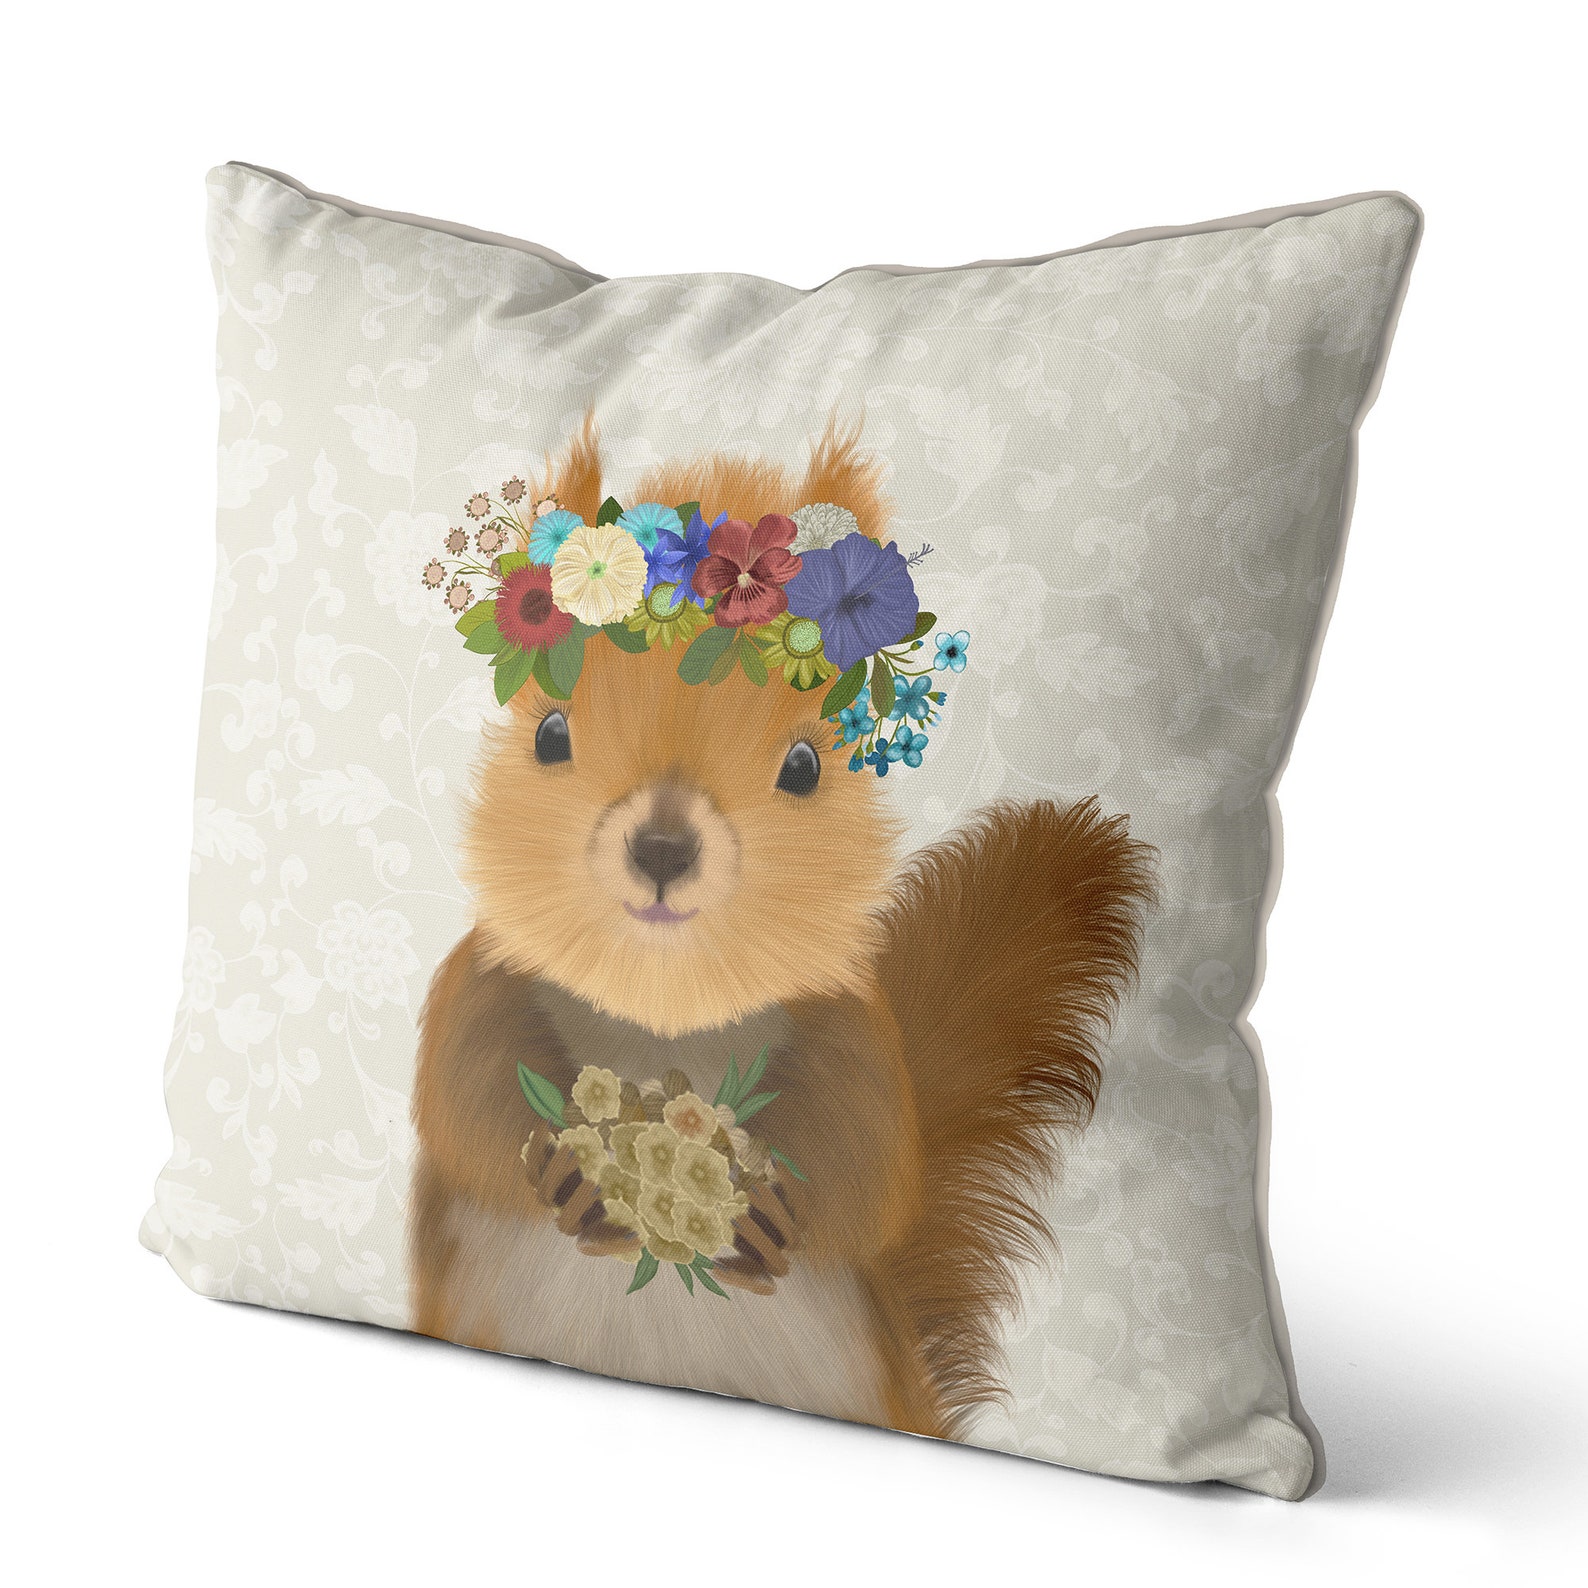 Squirrel Pillow Covers Squirrel Cushion Woodland Animal - Etsy